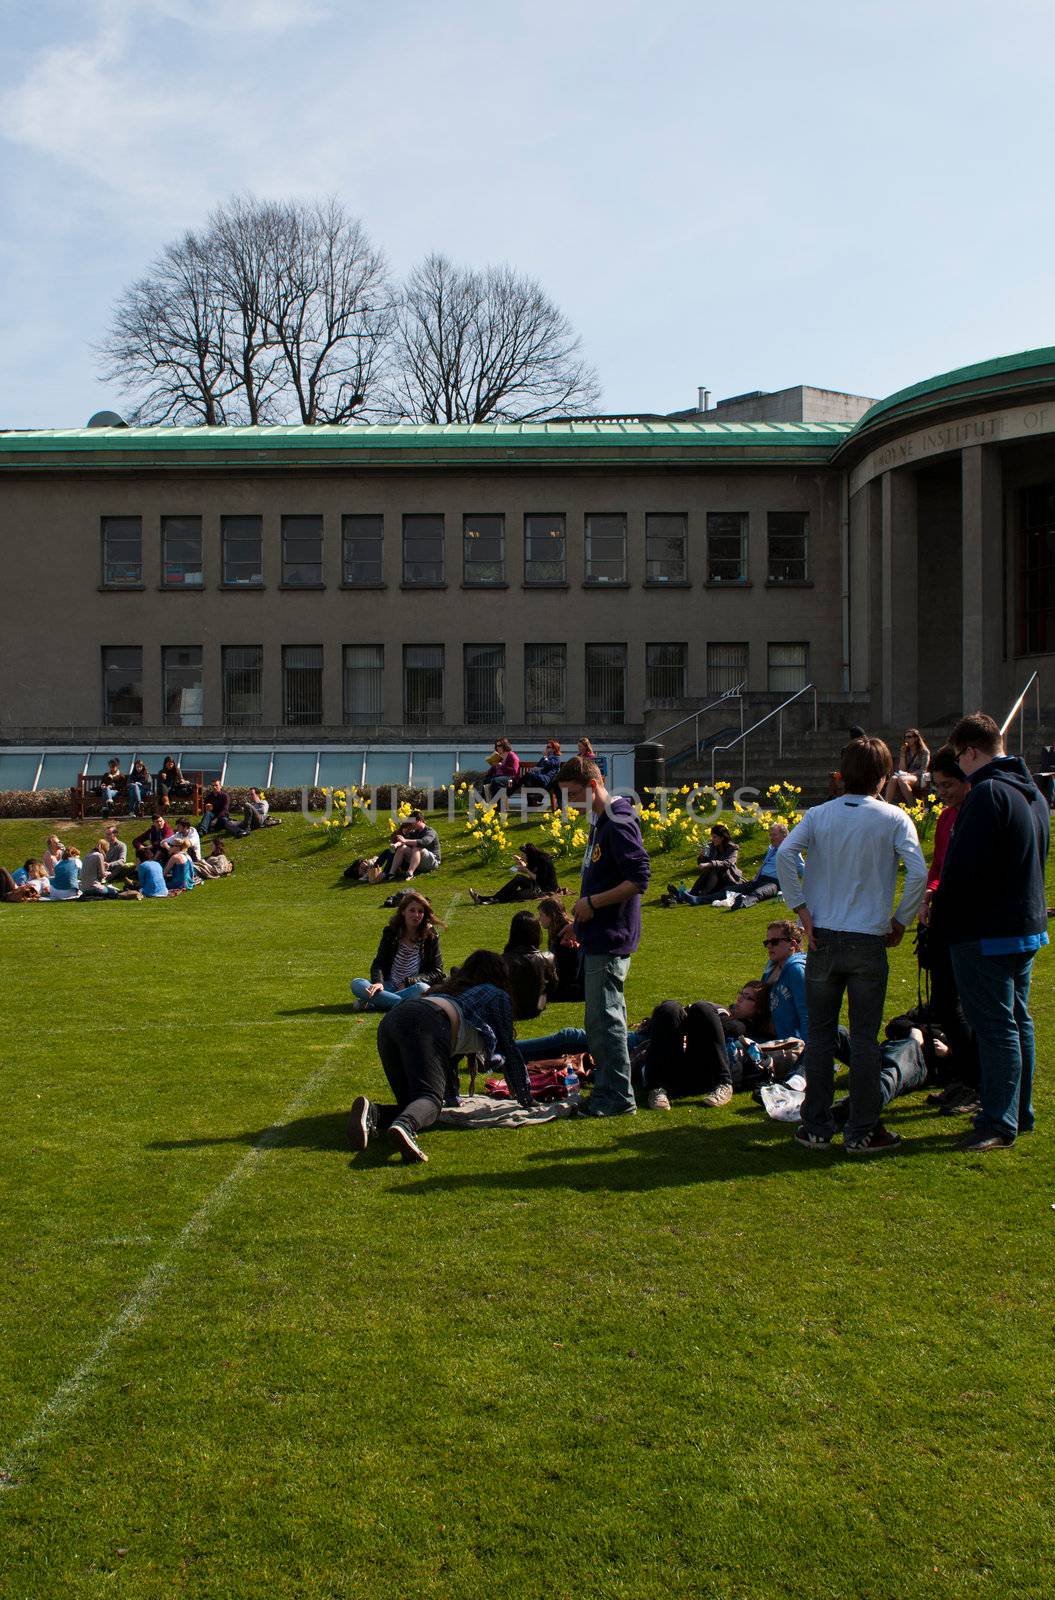 DUBLIN, IRELAND - MARCH 29: students enjoying outdoors at the cricket field in the Trinity College on March 29, 2012 in Dublin, Ireland.Ranked in 2011 by The Times as the 117th world's best university